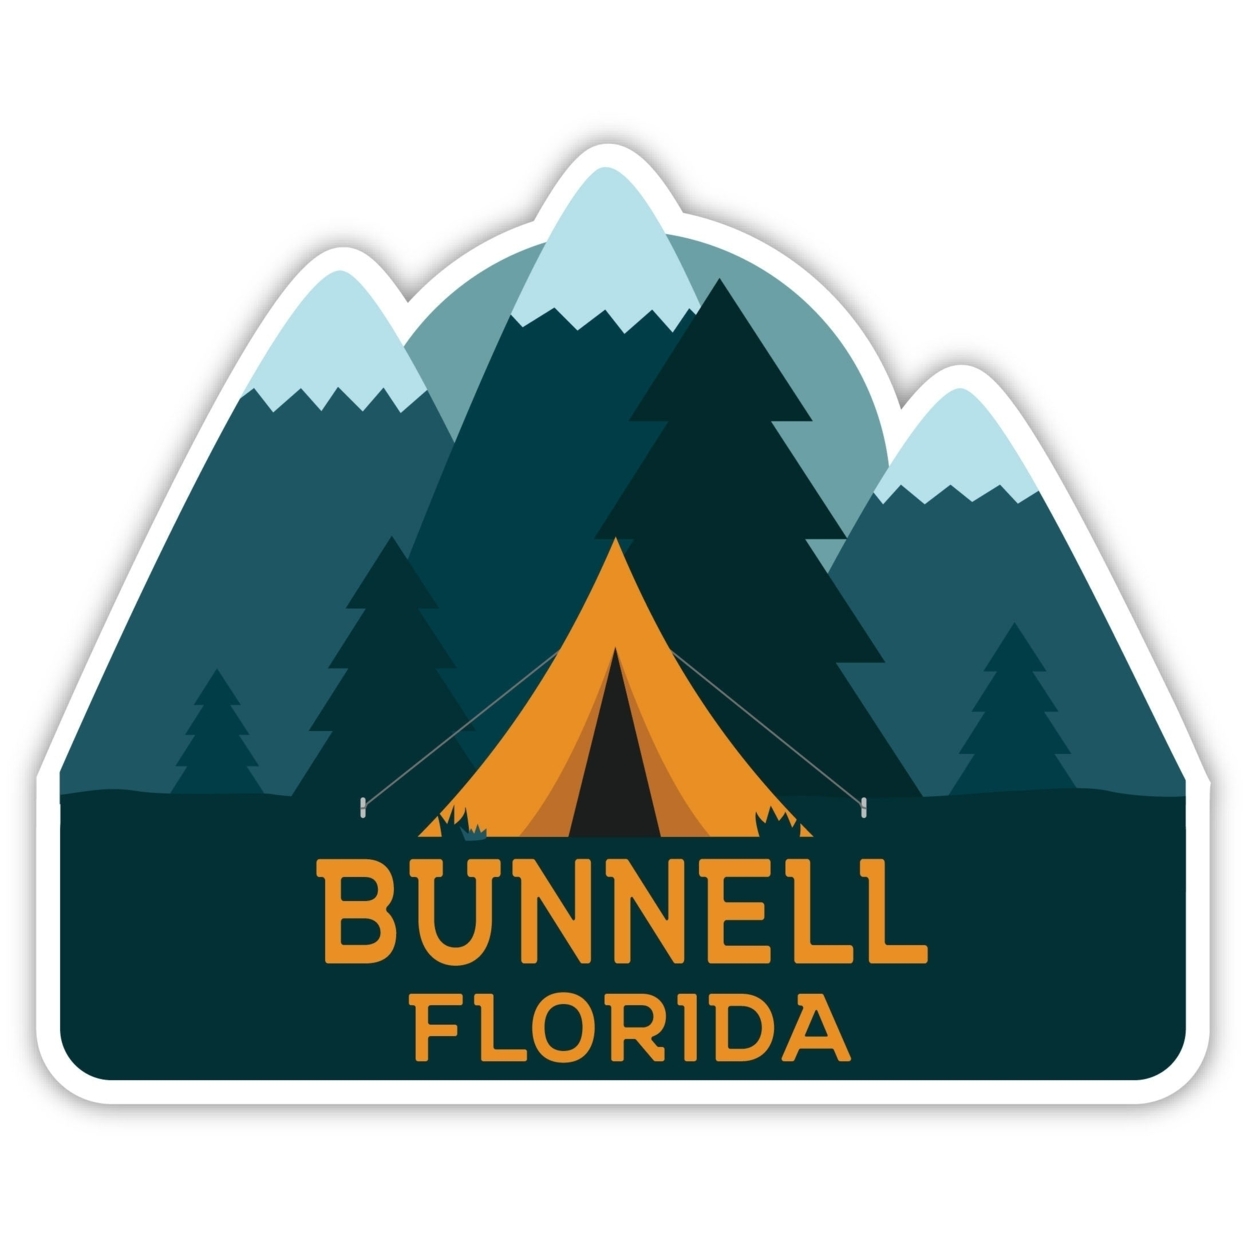 Bunnell Florida Souvenir Decorative Stickers (Choose Theme And Size) - 4-Pack, 2-Inch, Tent